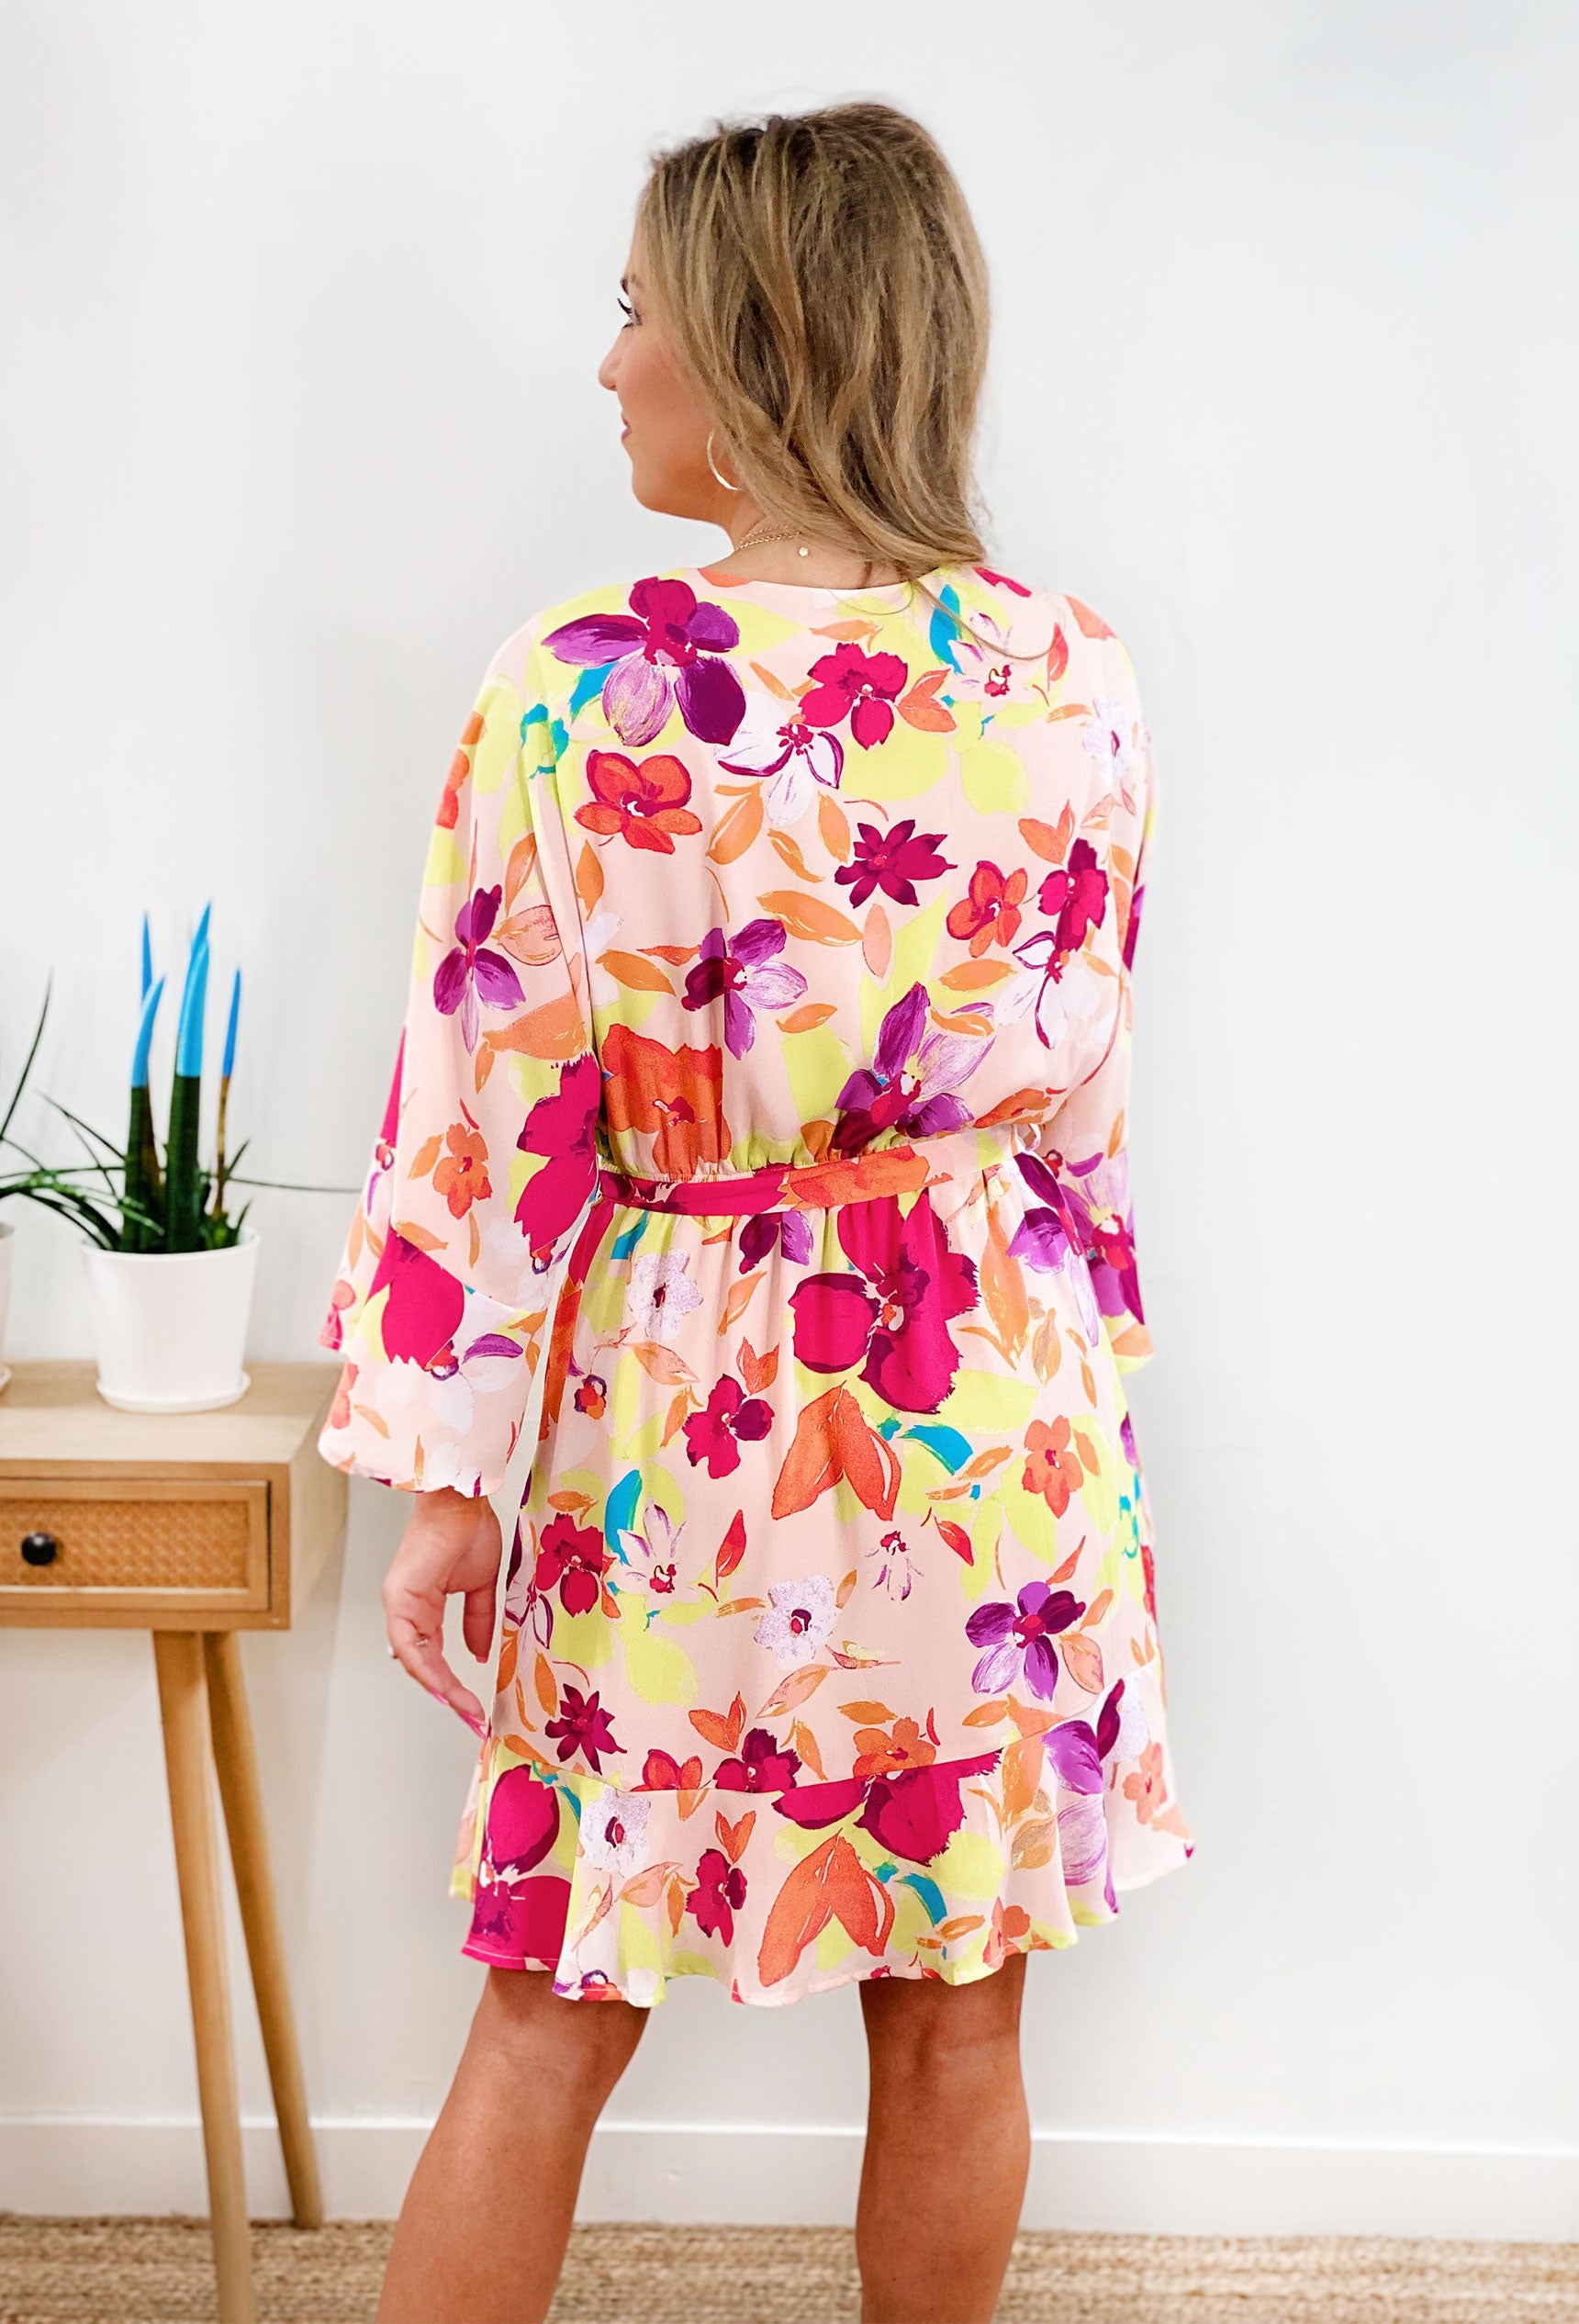 Sincerely Yours Floral Dress, floral dress with sinching around the waist, bell sleeves, self tie detial around waist, v-neck